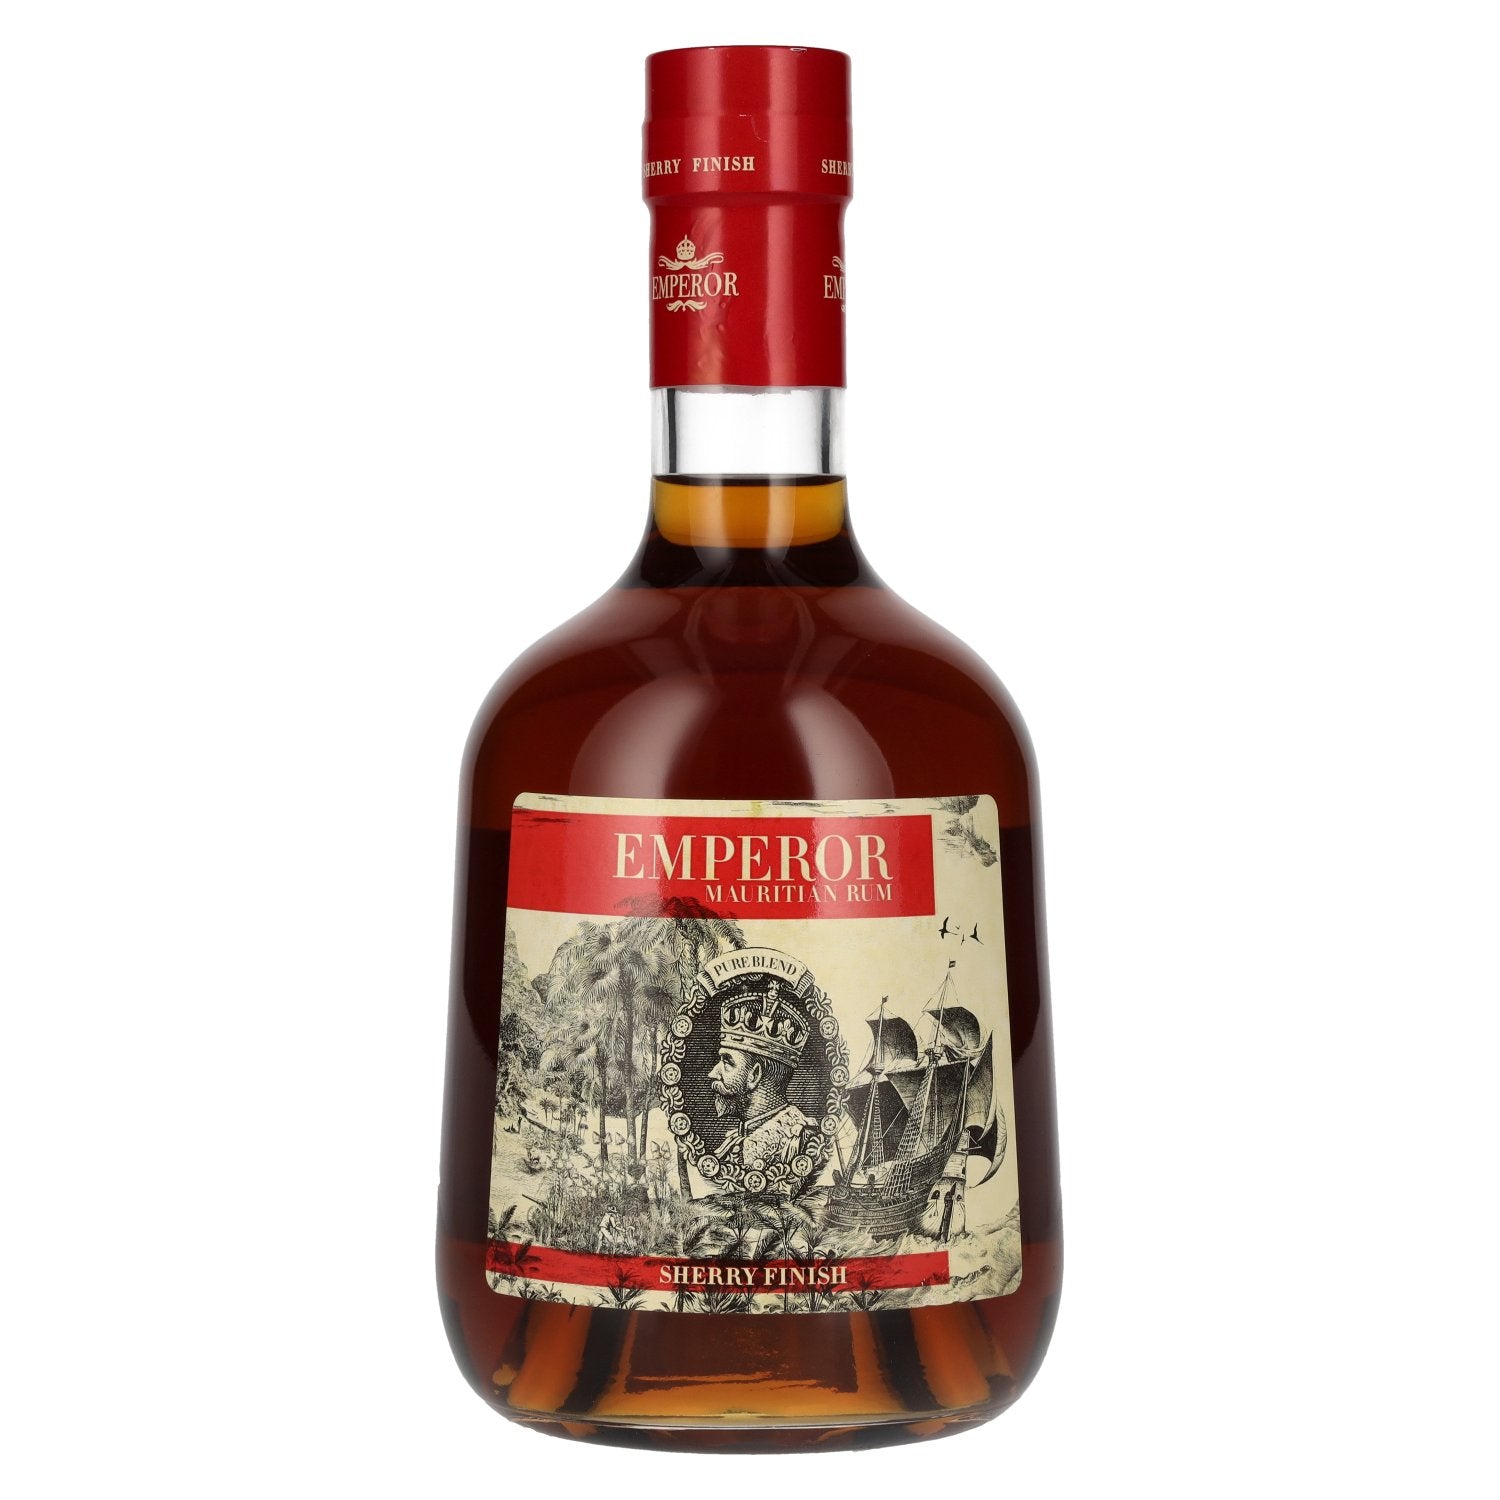 Emperor Mauritian Rum Aged Blend Sherry Finish 40% Vol. 0,7l